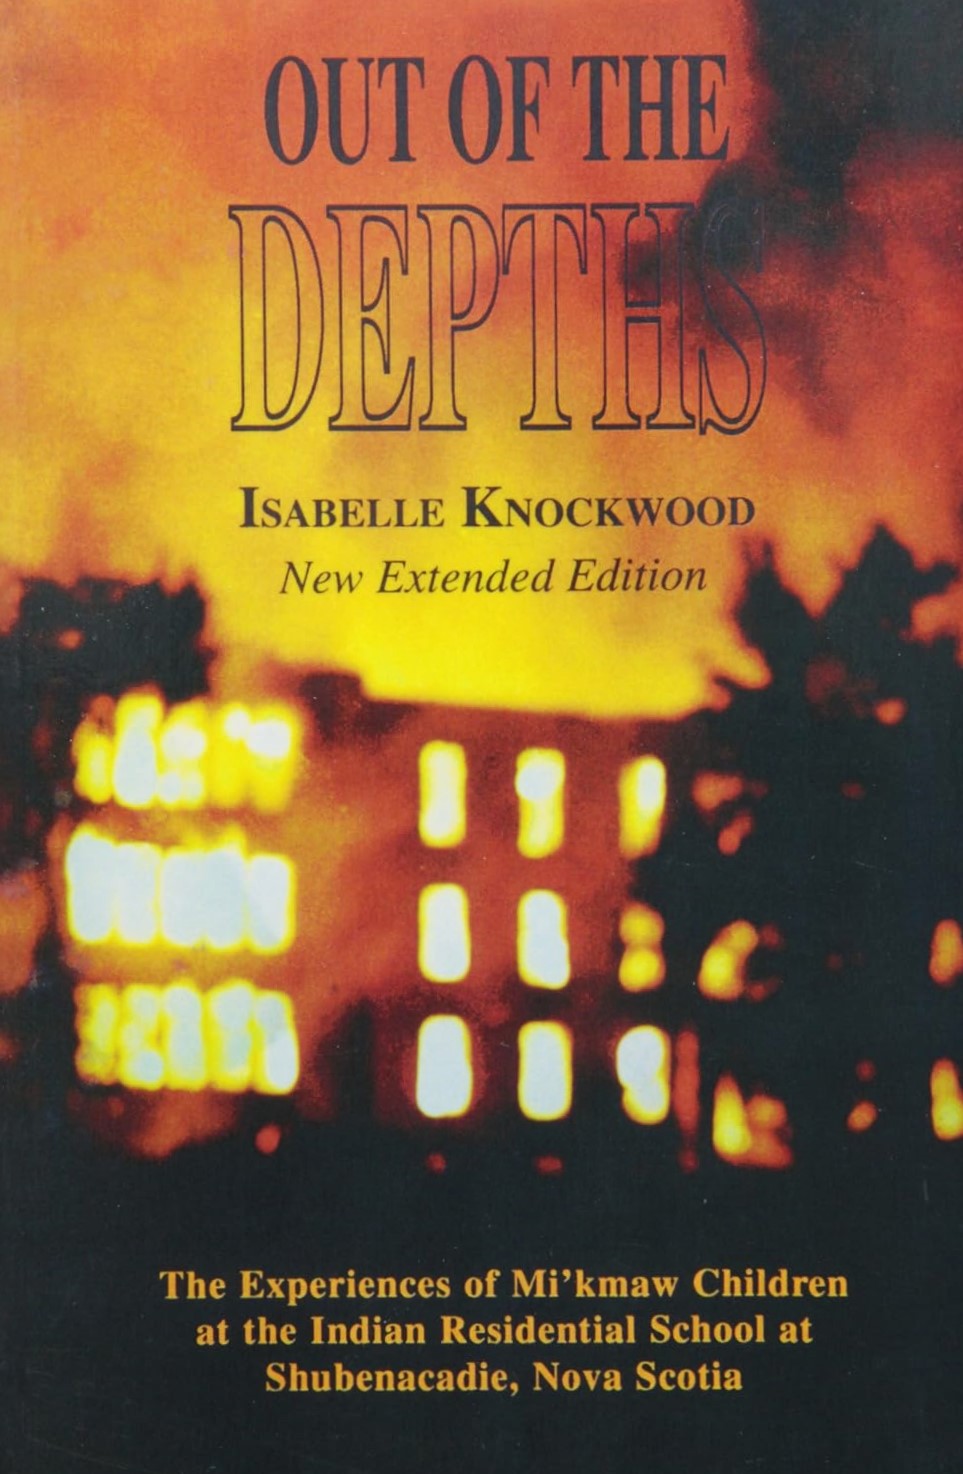 Livre ISBN 1896496296 Out of the Depths: The Experiences of Mi'kmaw Children at the Indian Residential School at Shubenacadie, Nova Scotia (Isabelle Knockwood)